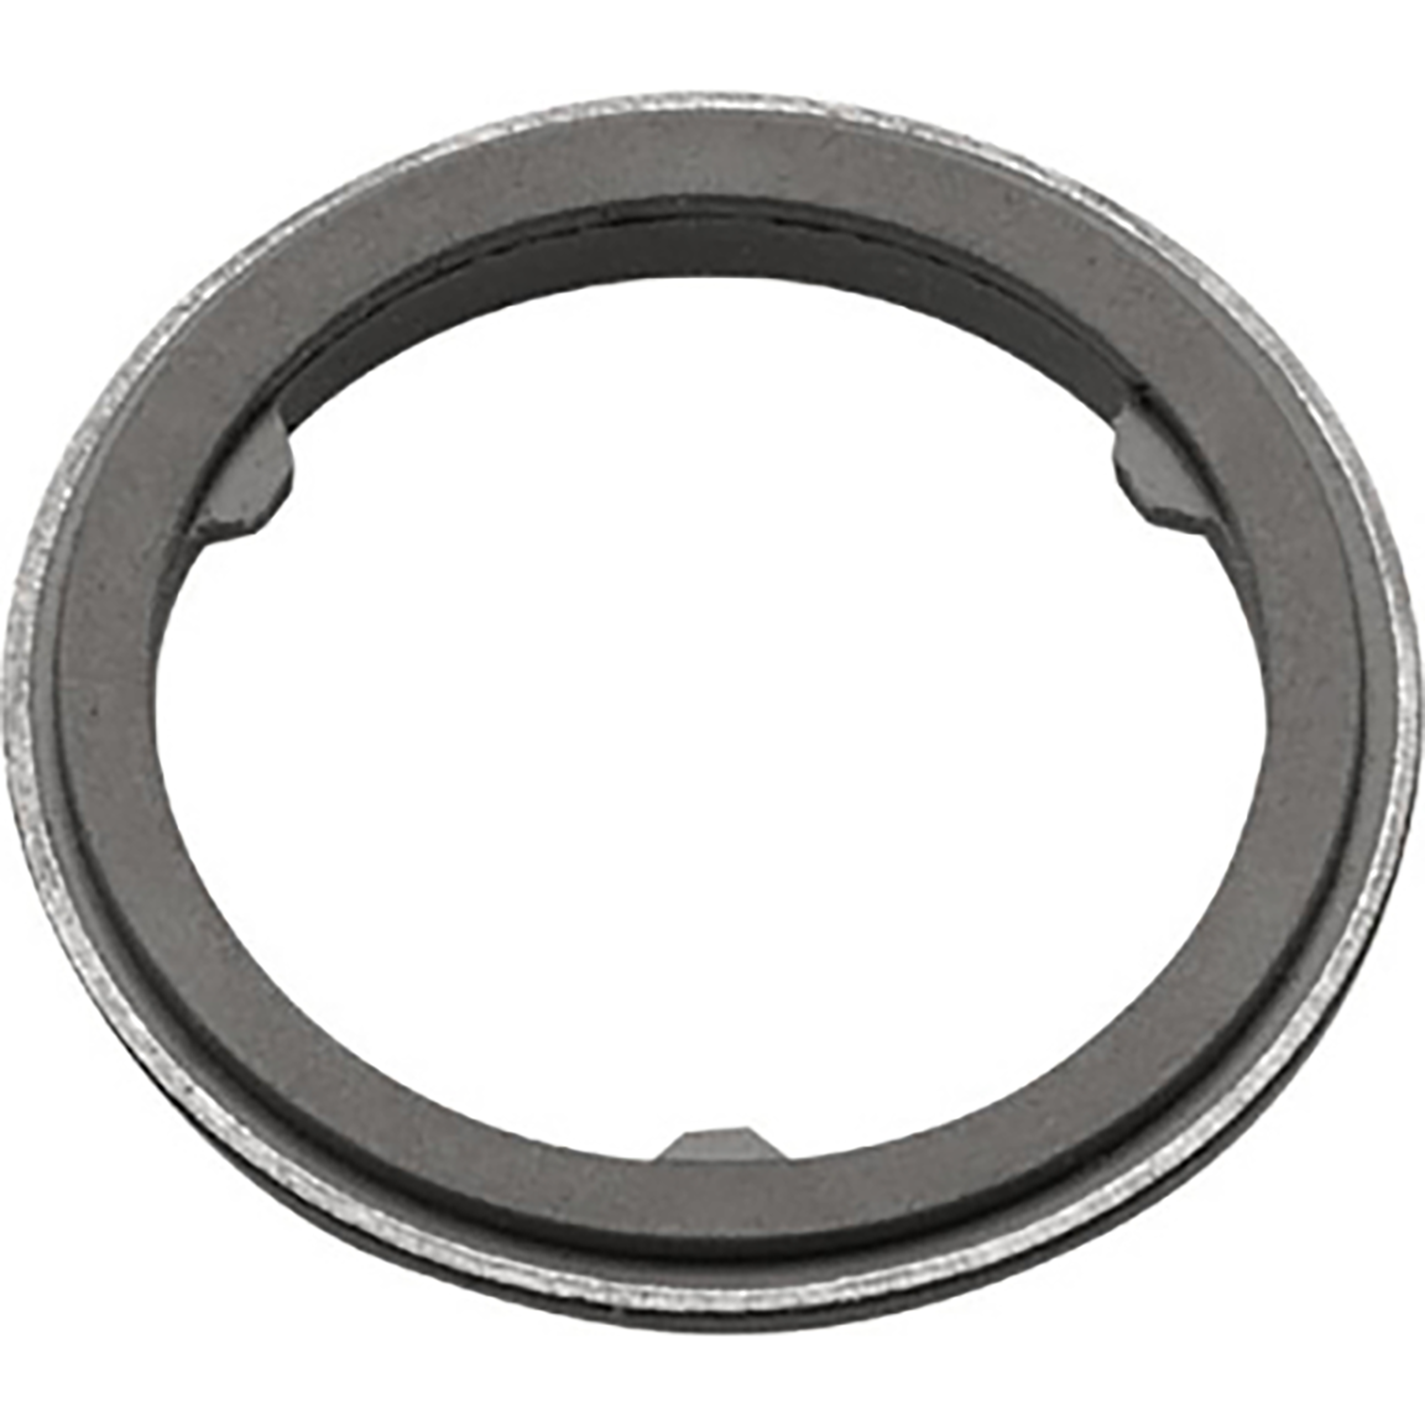 OL-1/2-100 SEALING RING sold in multiples of 100 only